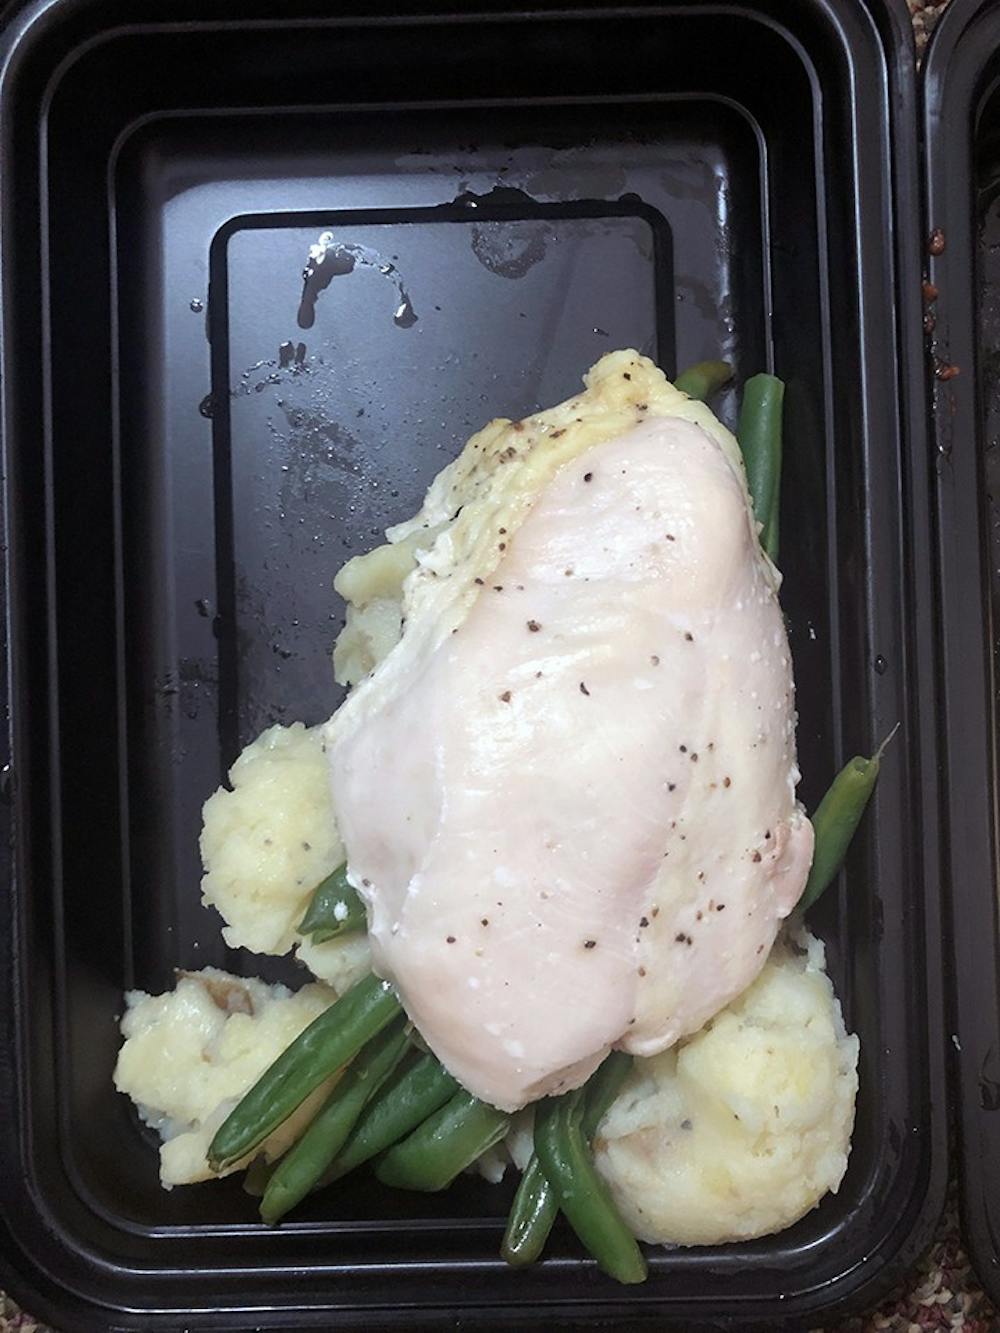 Quarantined students were given soggy chicken as part of their delivered meals.